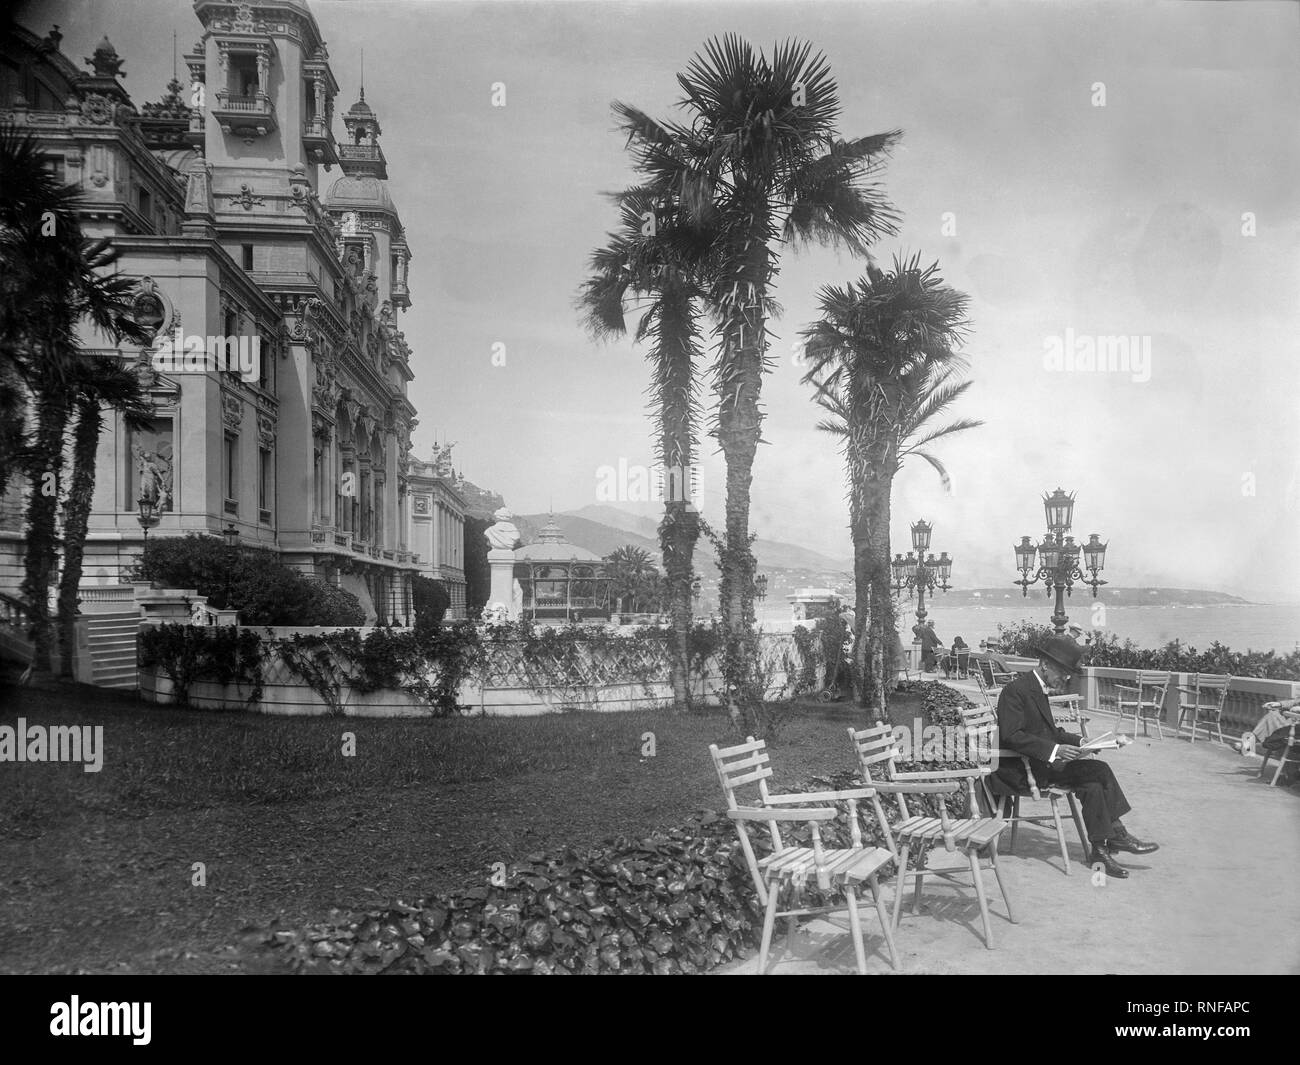 Vintage photograph showing the Promenade Des Anglais in Nice, France,taken in 1927. People can be seen relaxing along the Promenade dressed in the fashion of the period. Stock Photo